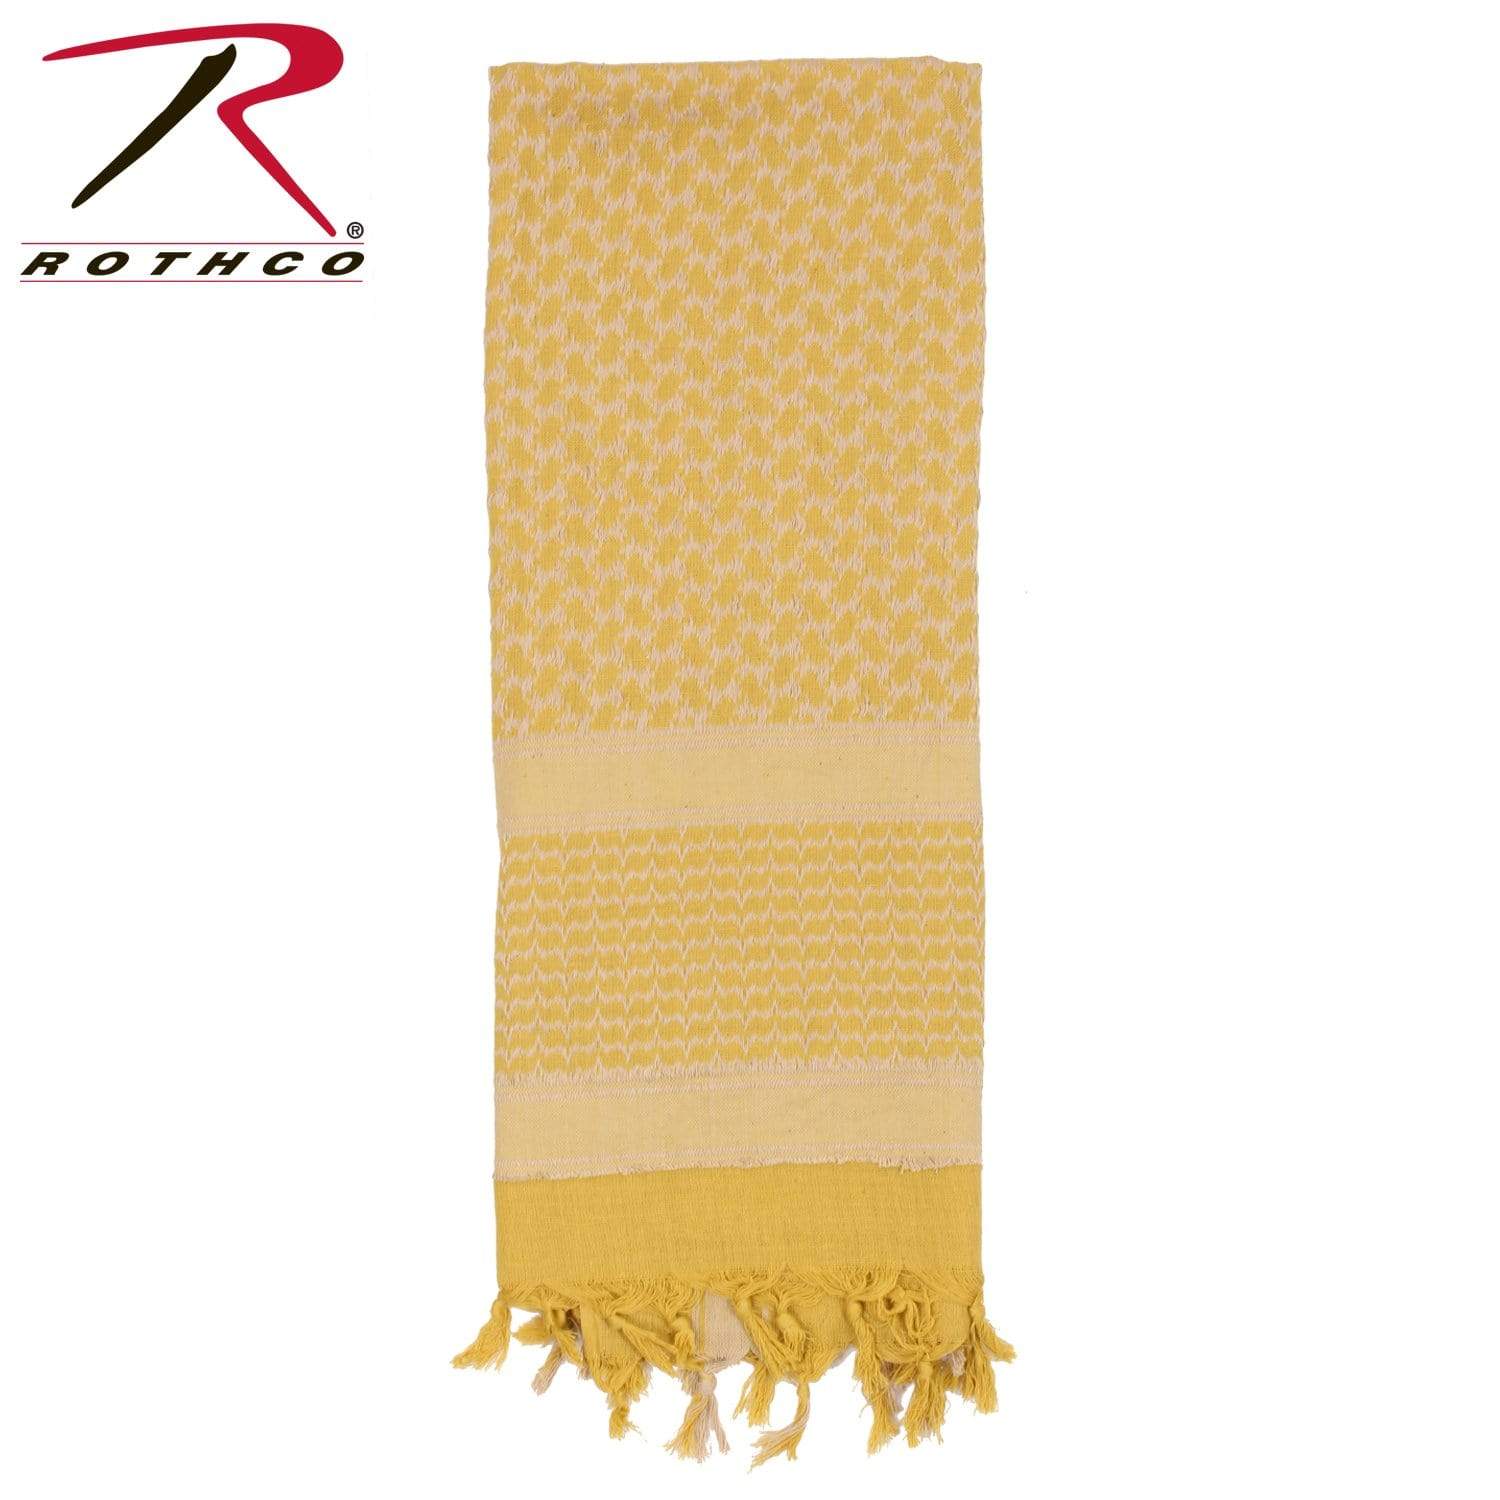 Rothco Shemagh Tactical Desert Keffiyeh Scarf - Desert Sand / Tan - Eminent Paintball And Airsoft